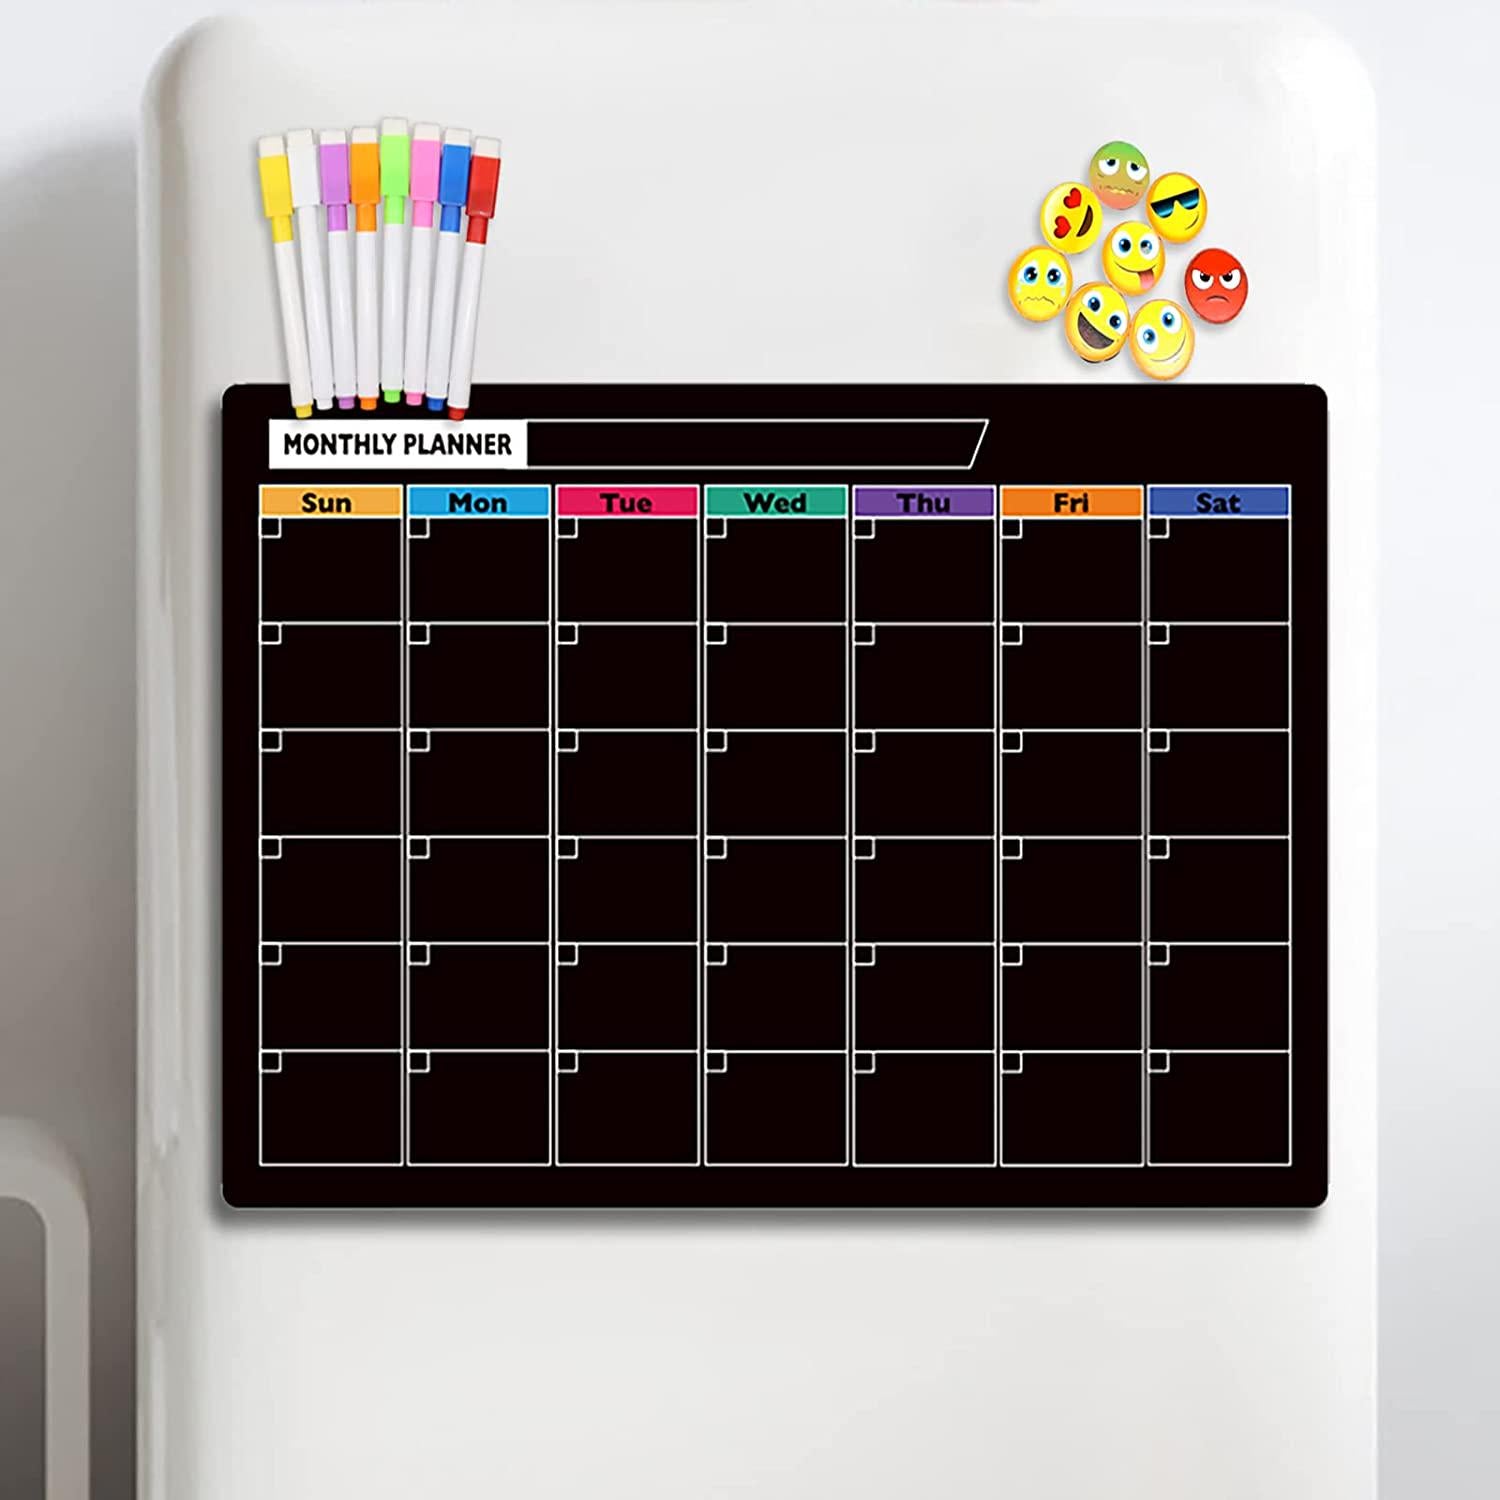 Zoste, Magnetic Black Dry Erase Board for Fridge 17 x12 ,With Bright Neon Chalk Markers, Fridge Magnet Board for Monthly /Weekly Planner Grocery List,Super Easy to Erase Magnetic Calendar for Refrigerator.